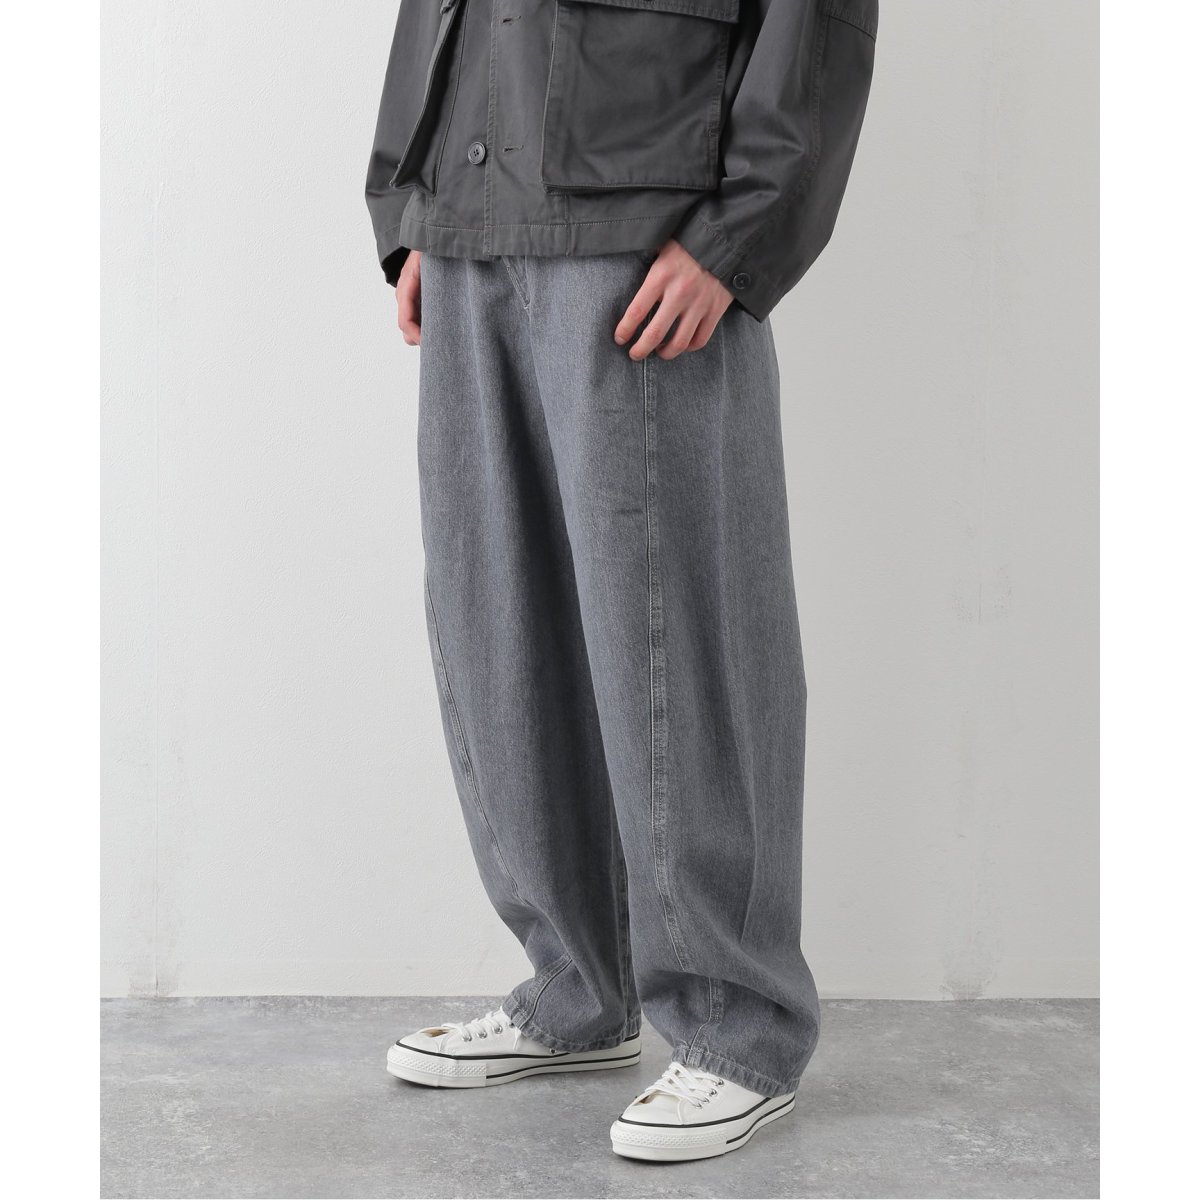 【LEMAIRE】TWISTED PANTS denim stone grey